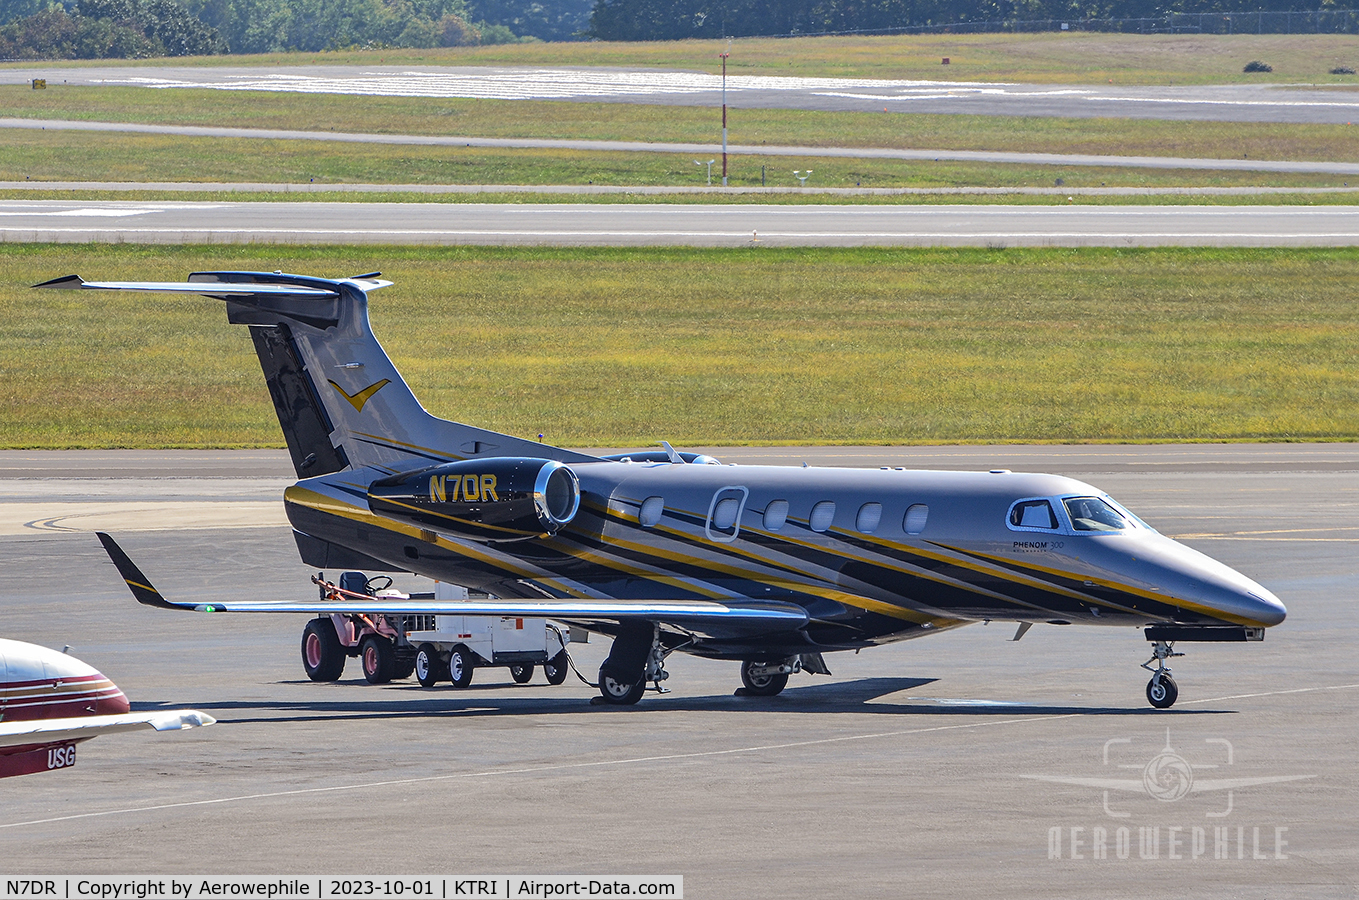 N7DR, 2015 Embraer EMB-505 Phenom 300 C/N 50500323, Parked on the ramp at Tri-Cities Airport.